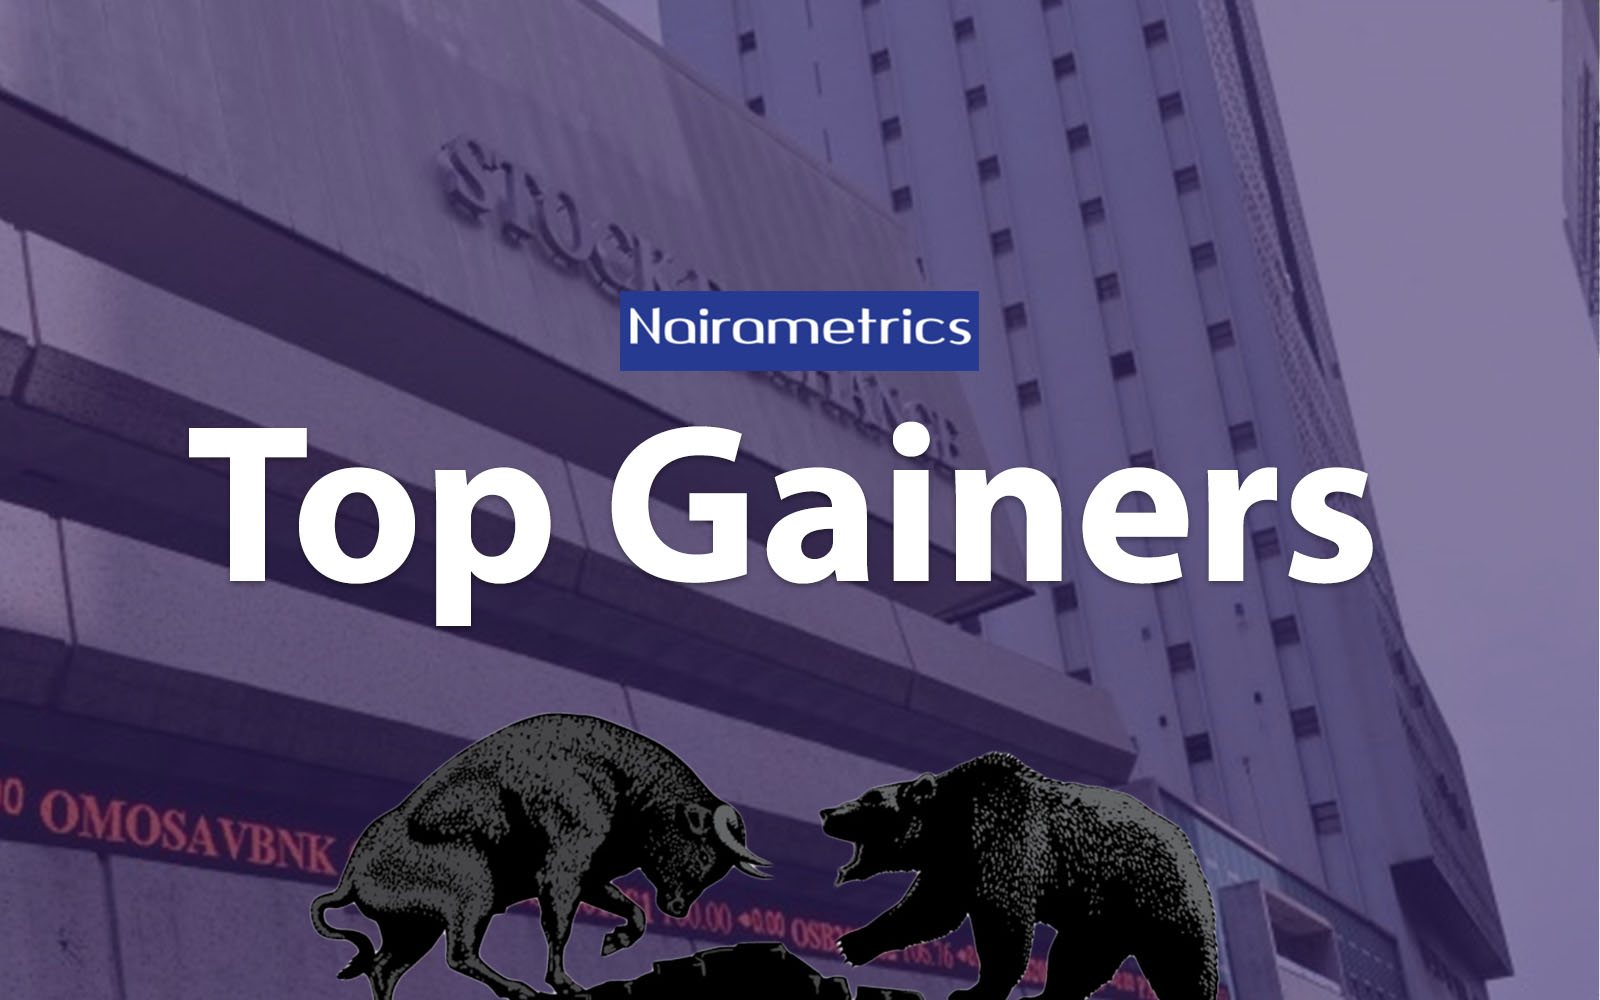 Cornerstone Insurance leads this week’s gainers as NSE closes on negative note